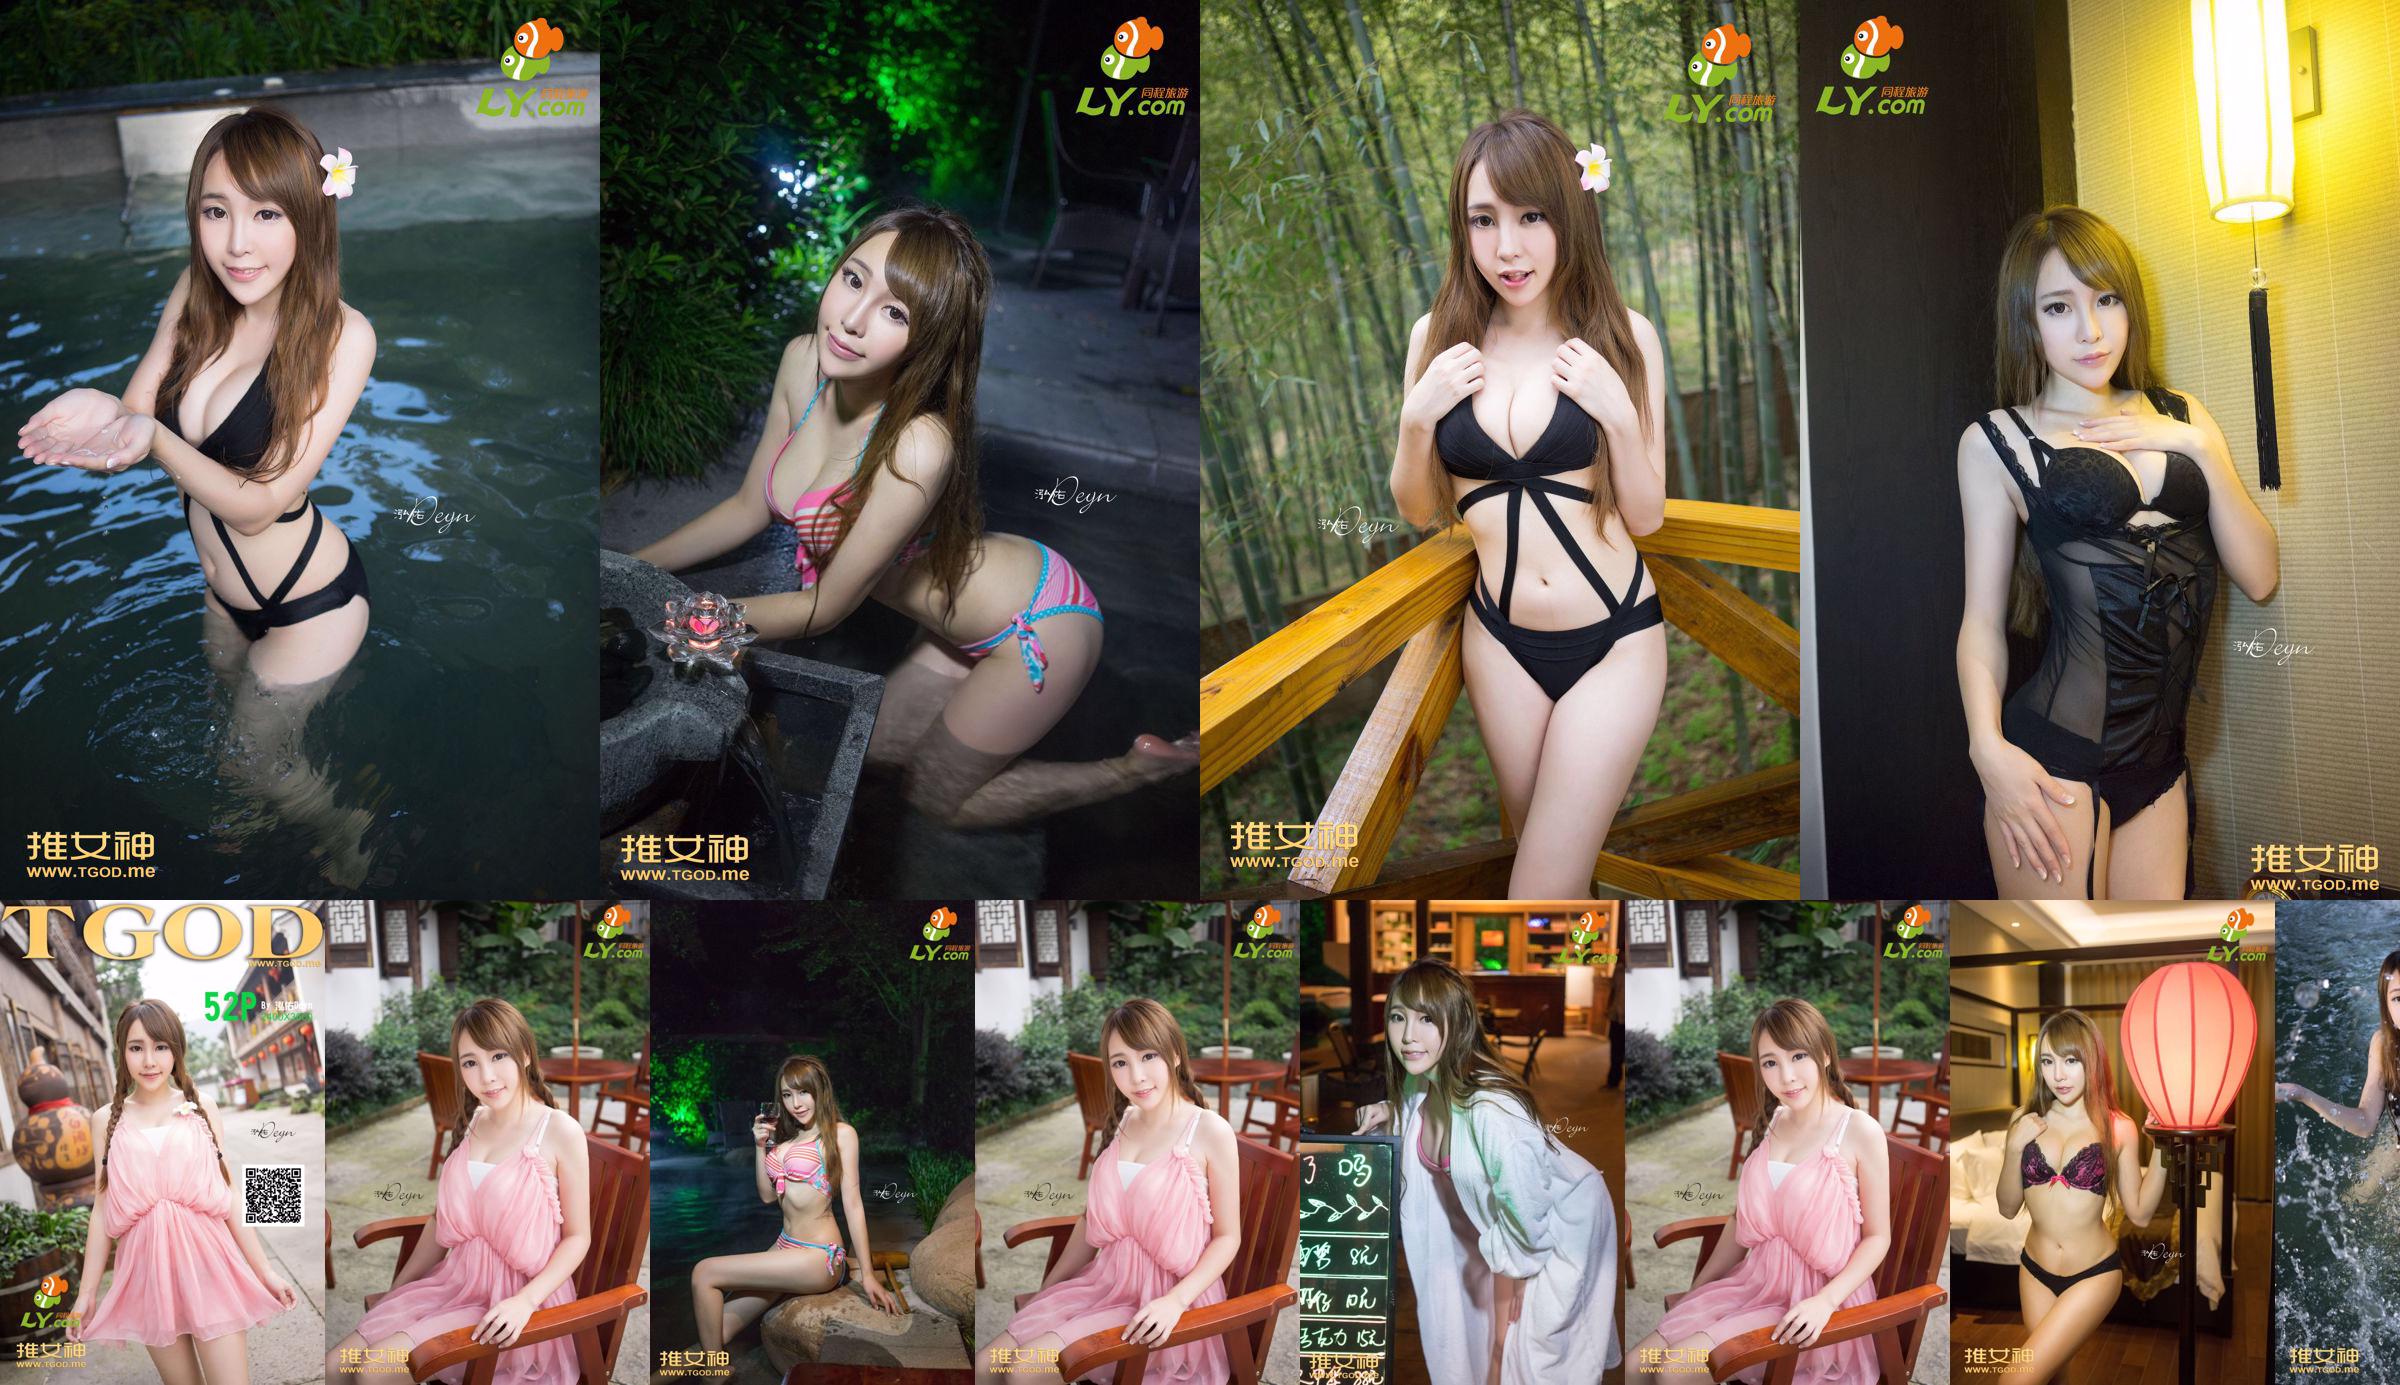 Huang Mengxian "Where Is the Goddess Going Issue 7" [TGOD Push Goddess] No.b49863 Pagina 1